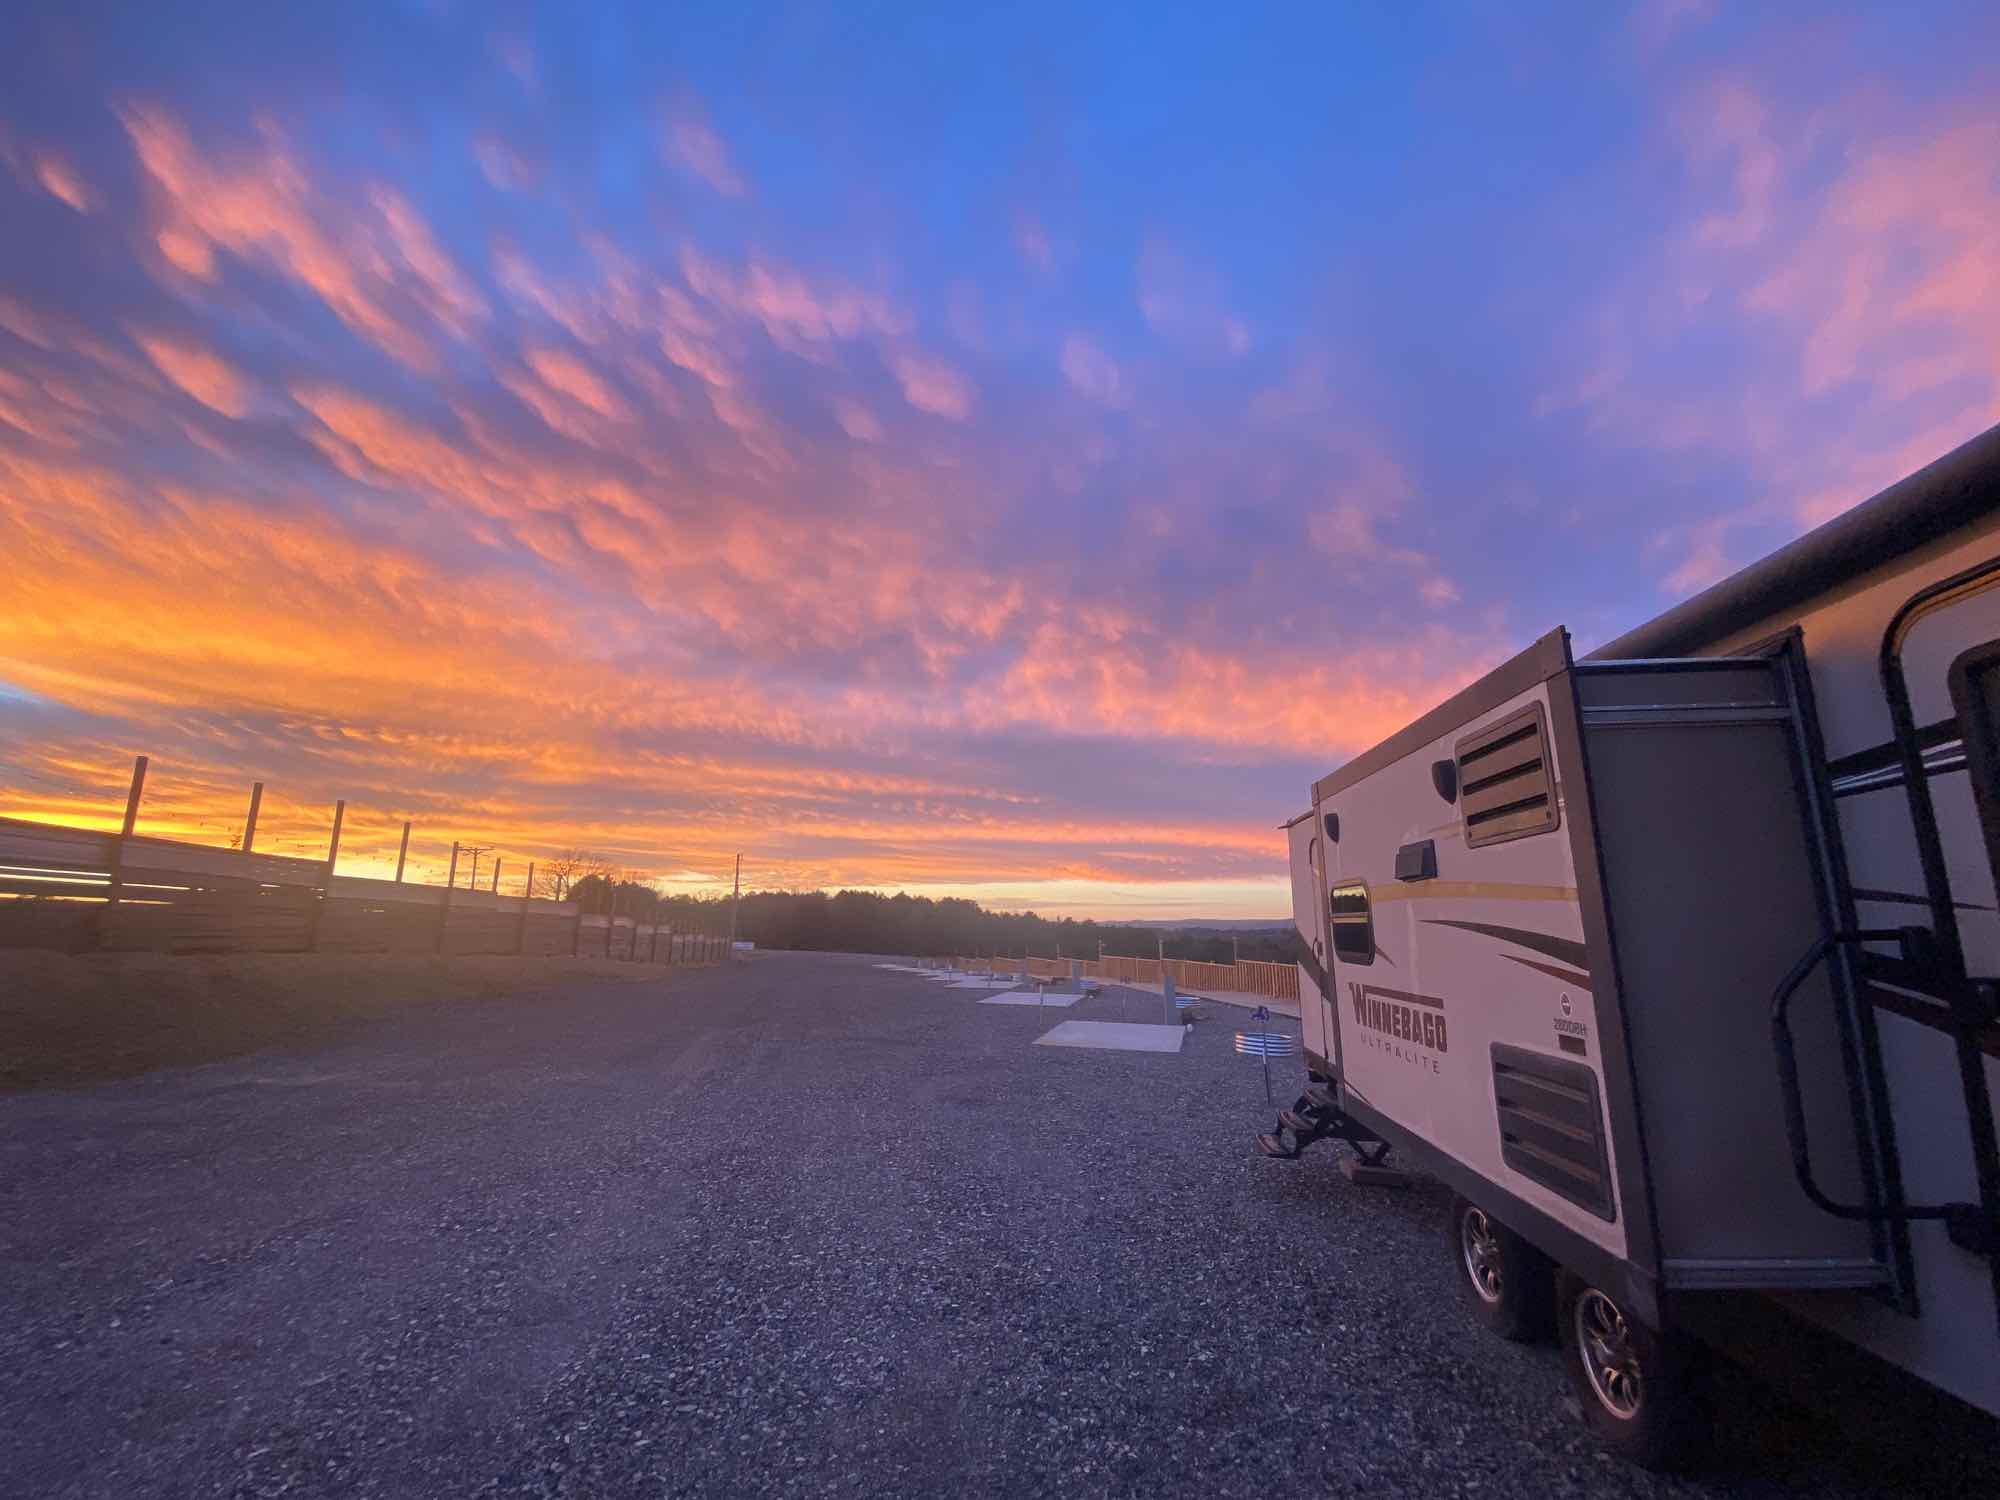 There are a lot of benefits to long stay rv travel